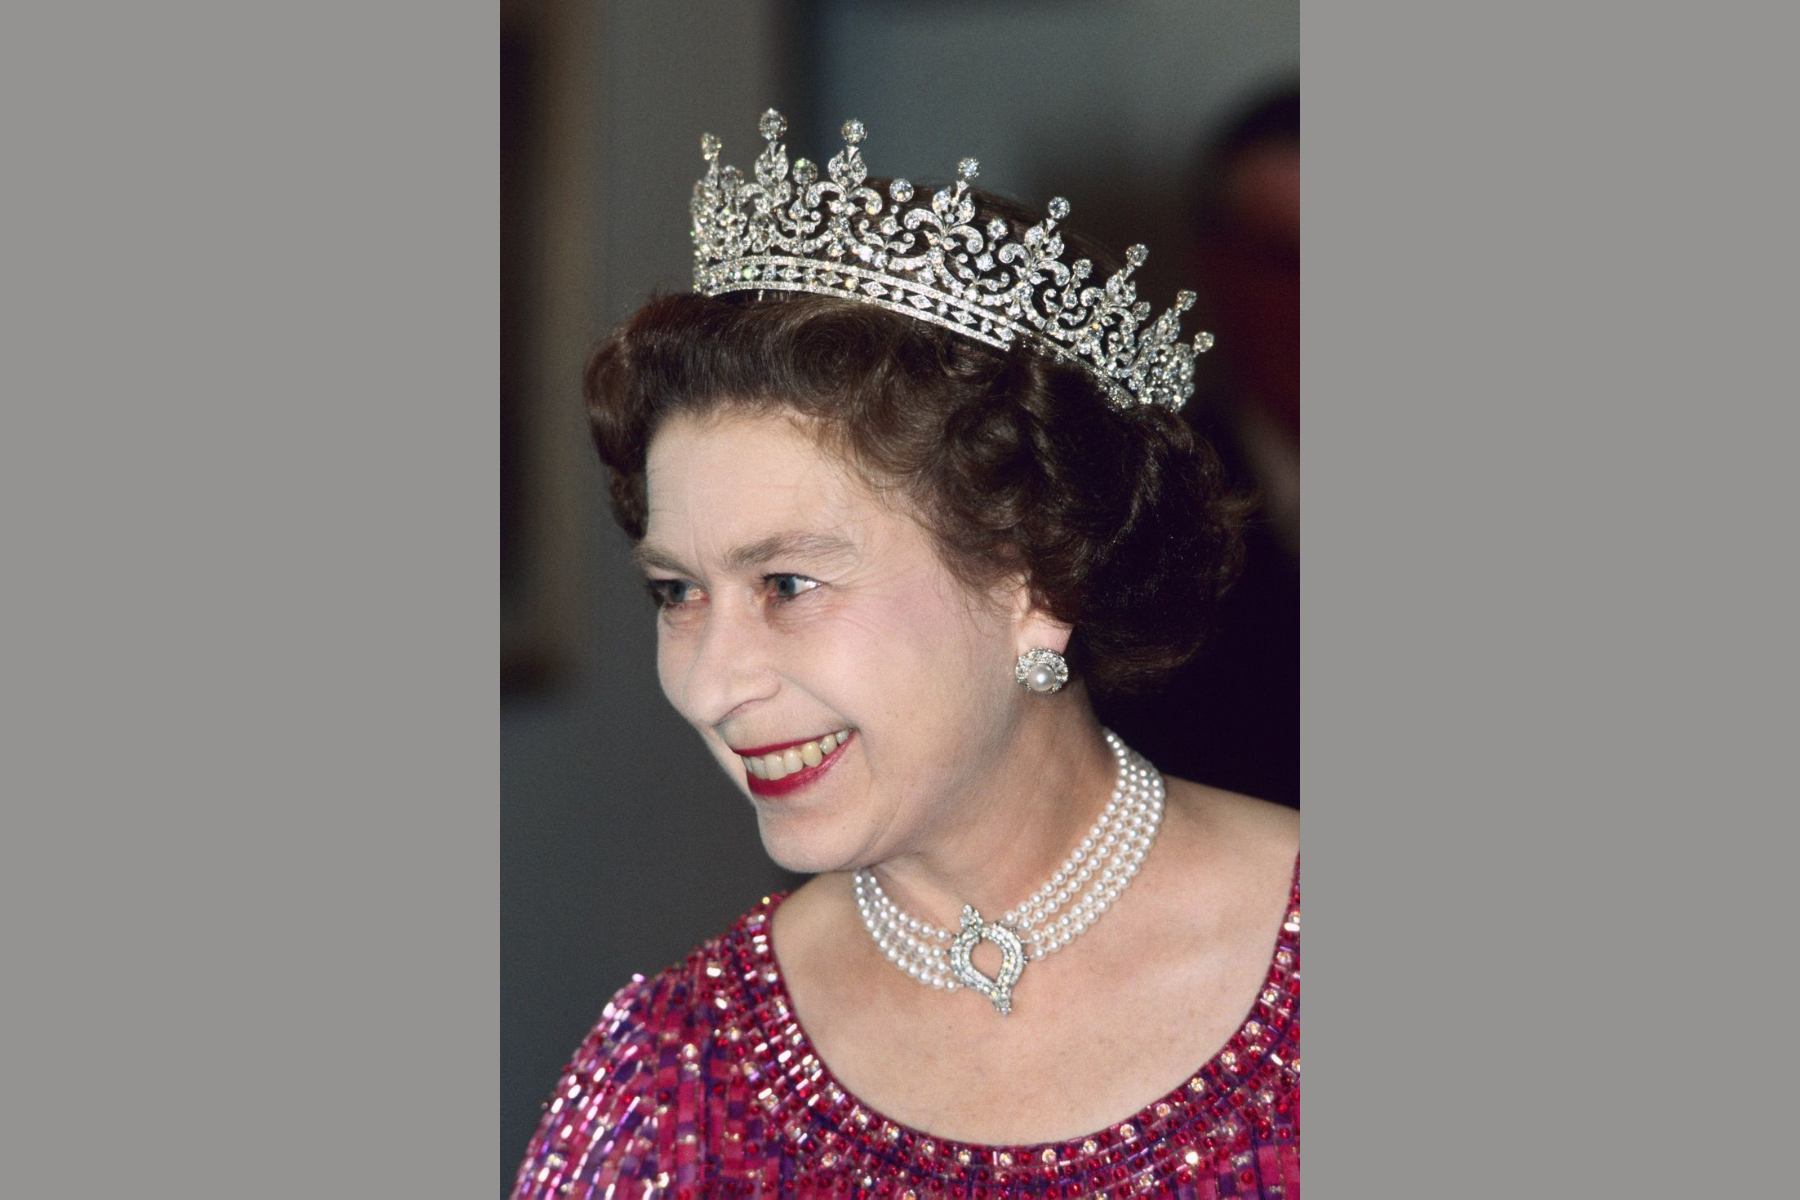 Queen Elizabeth II wearing the Japanese pearl choker and a crown